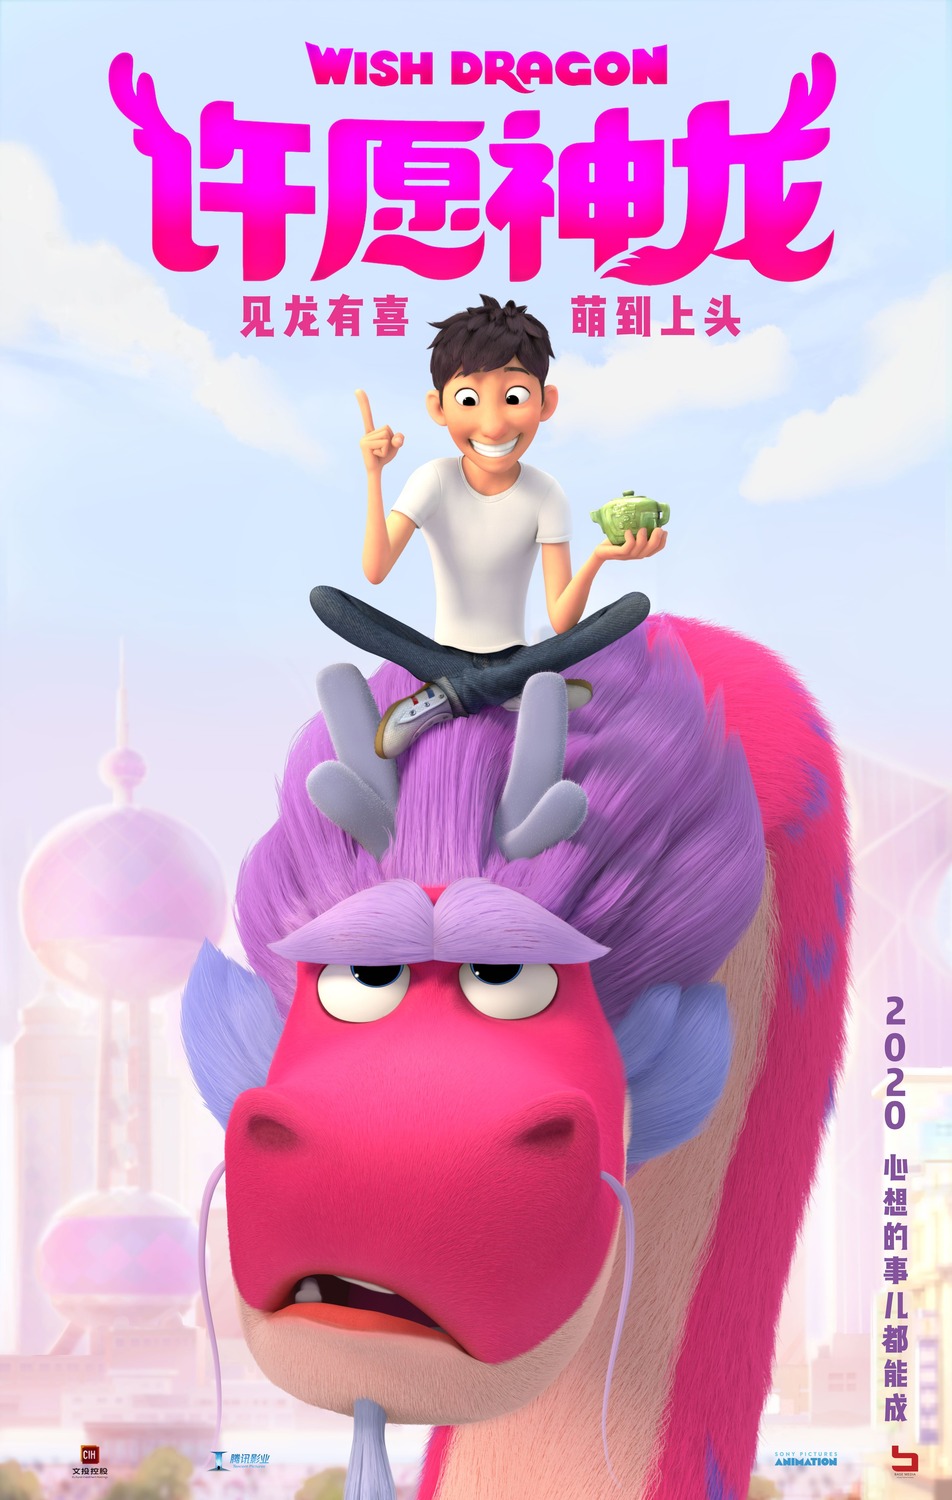 Extra Large Movie Poster Image for Wish Dragon (#2 of 4)